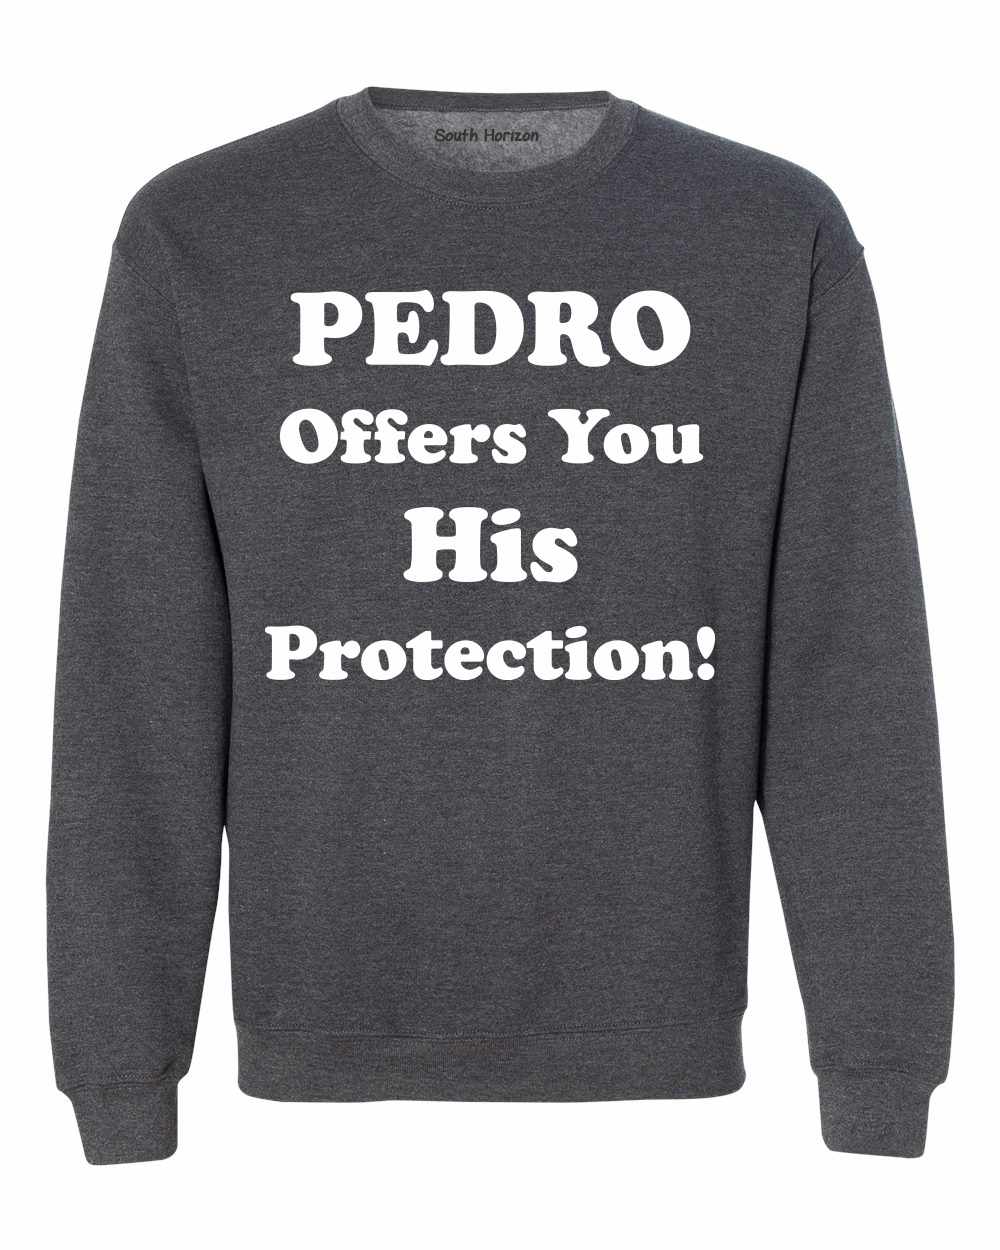 PEDRO OFFERS YOU HIS PROTECTION on SweatShirt (#385-11)